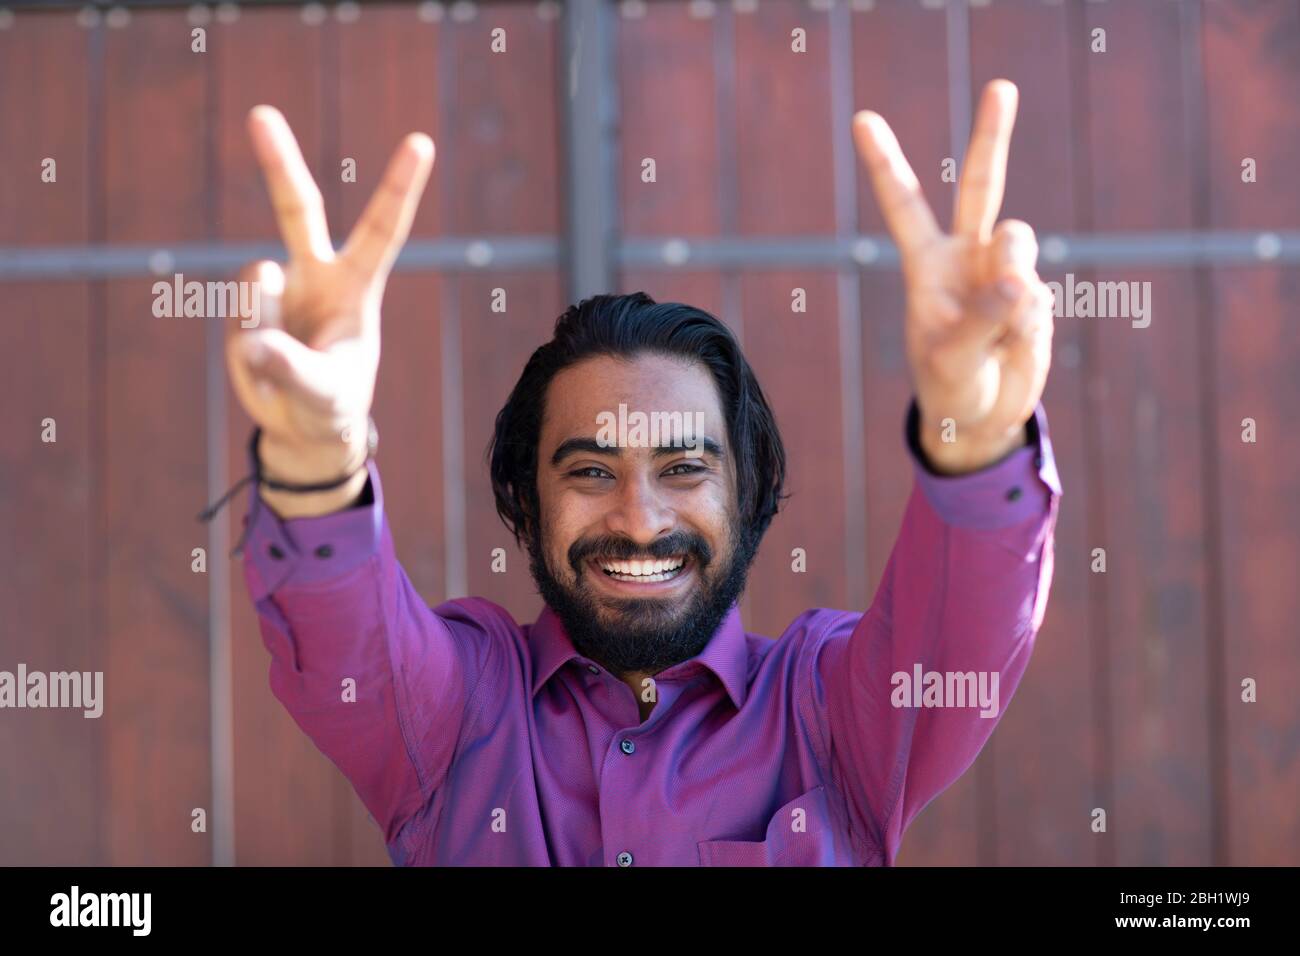 Young smiling man making peace sign in front of a gate Stock Photo